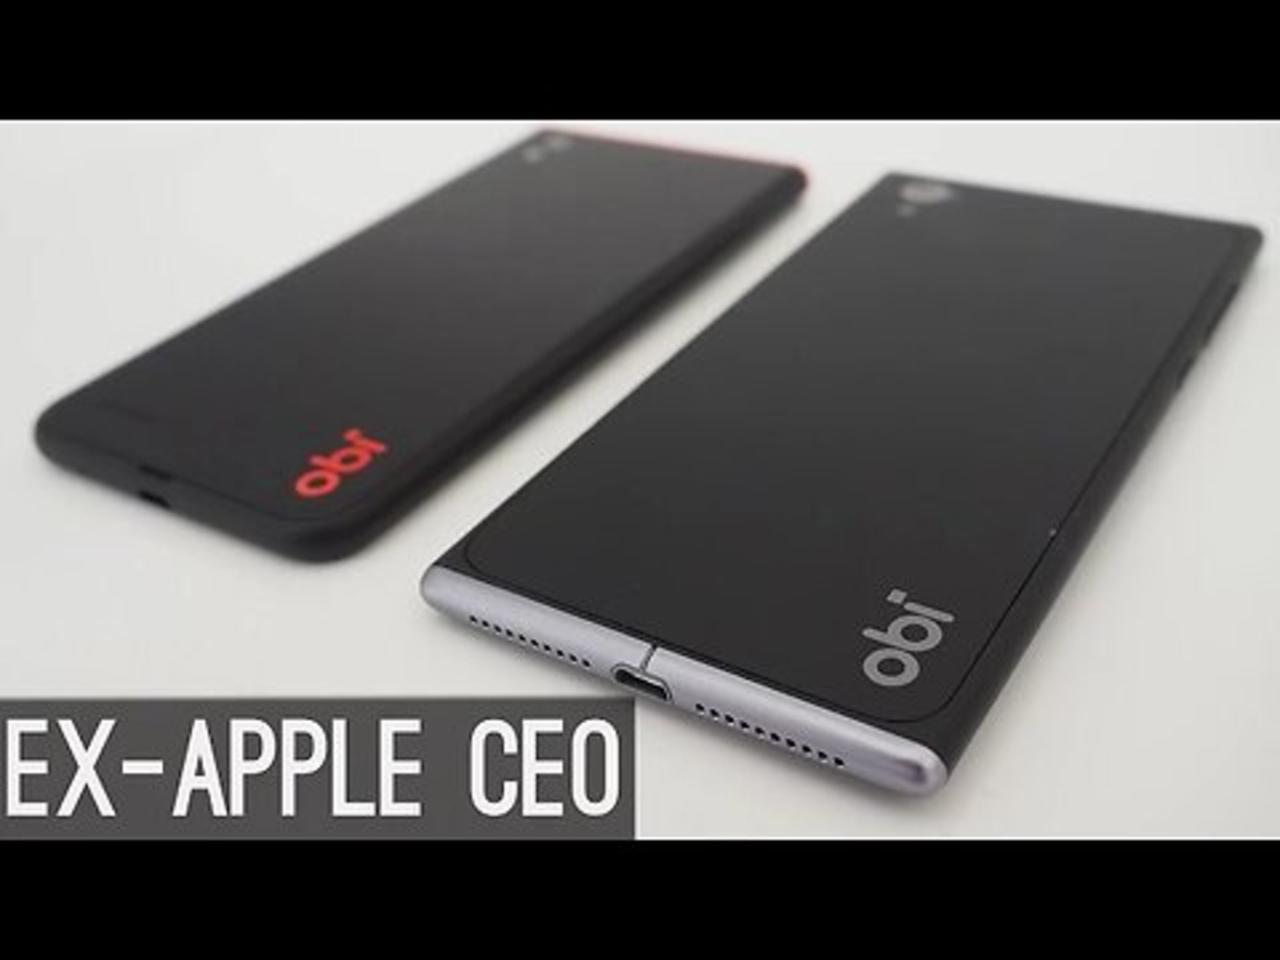 Ex-Apple CEO Starts His Own Phone Company!